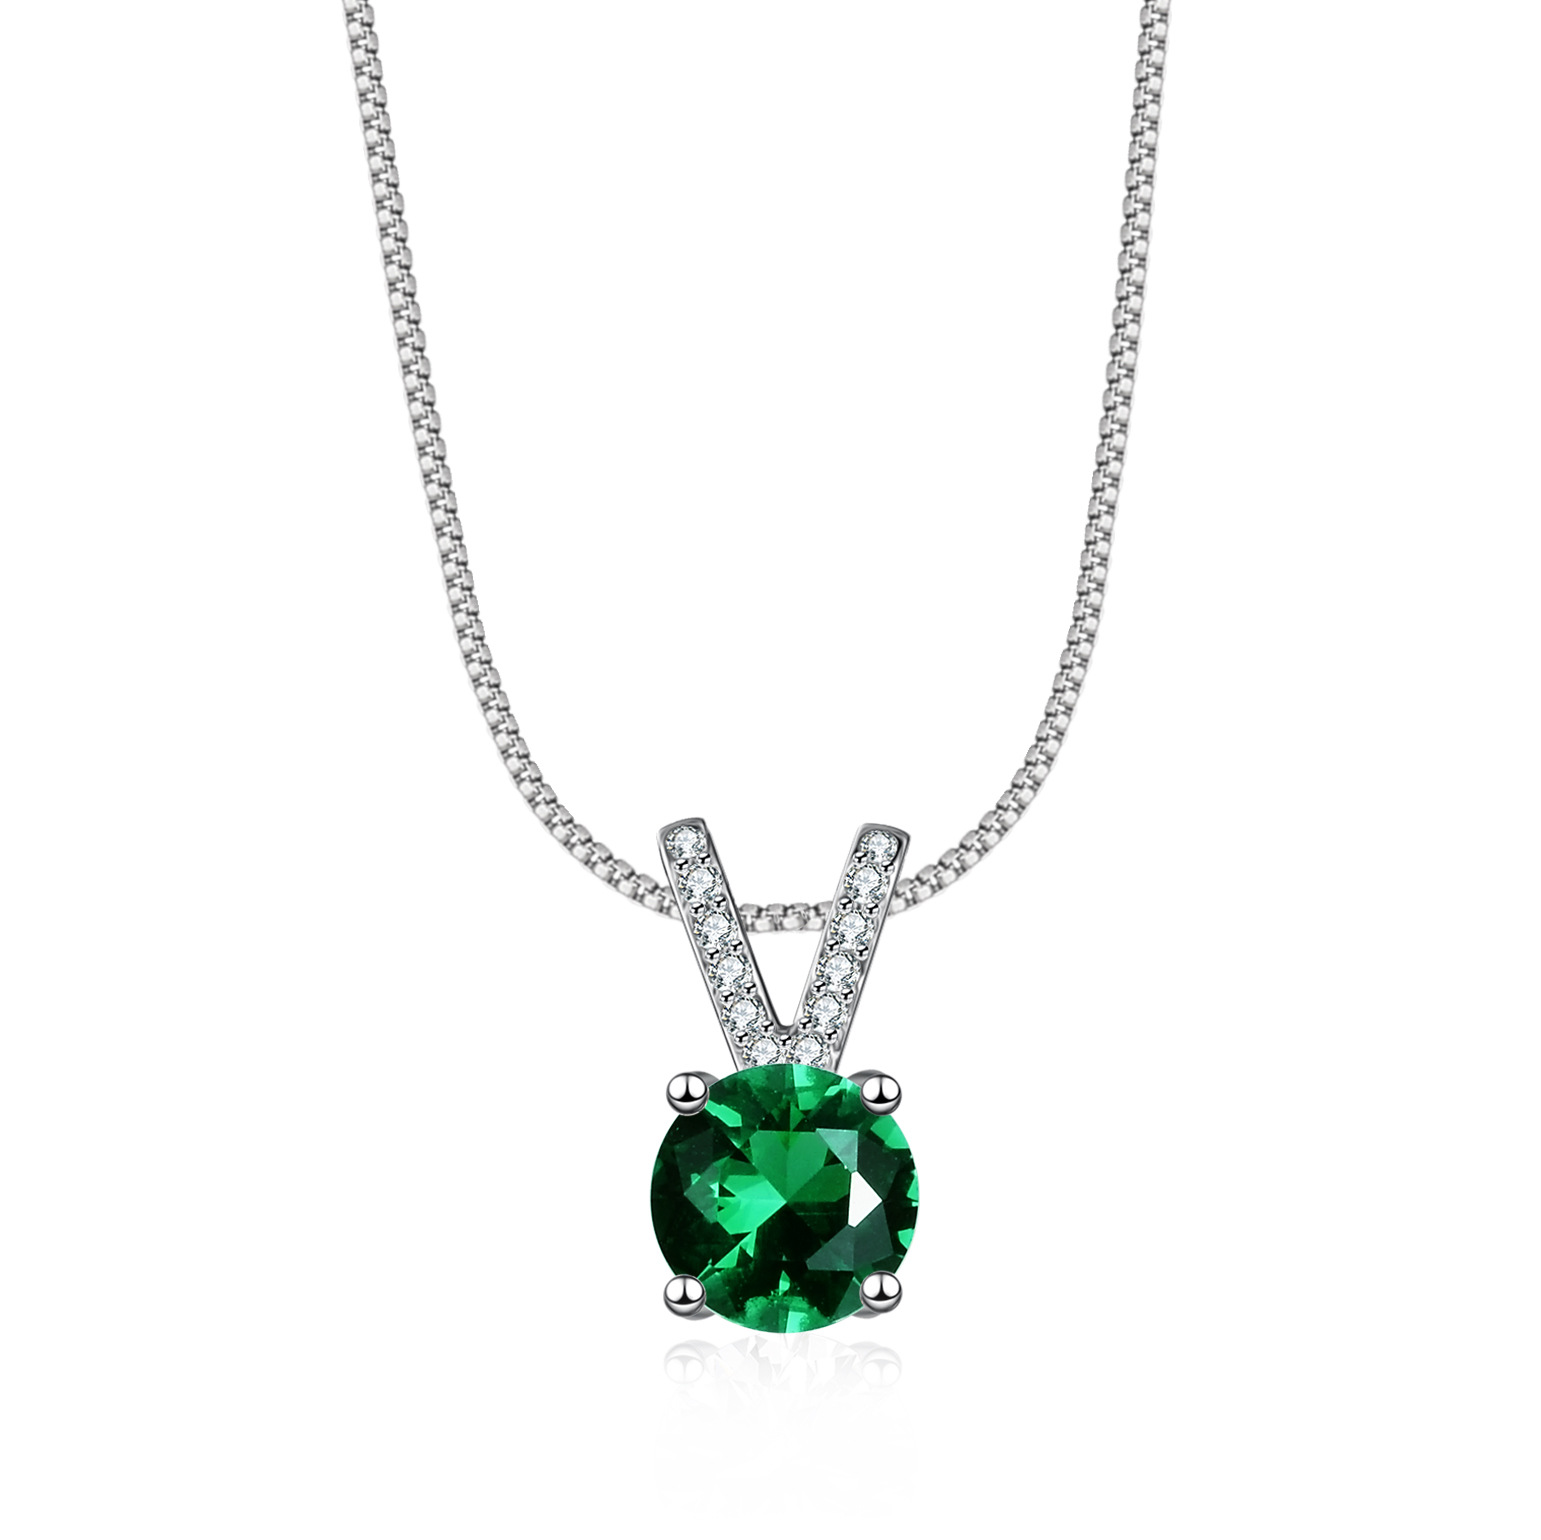 Cz Green Colored Gem Sterling Silver Pendant Necklace